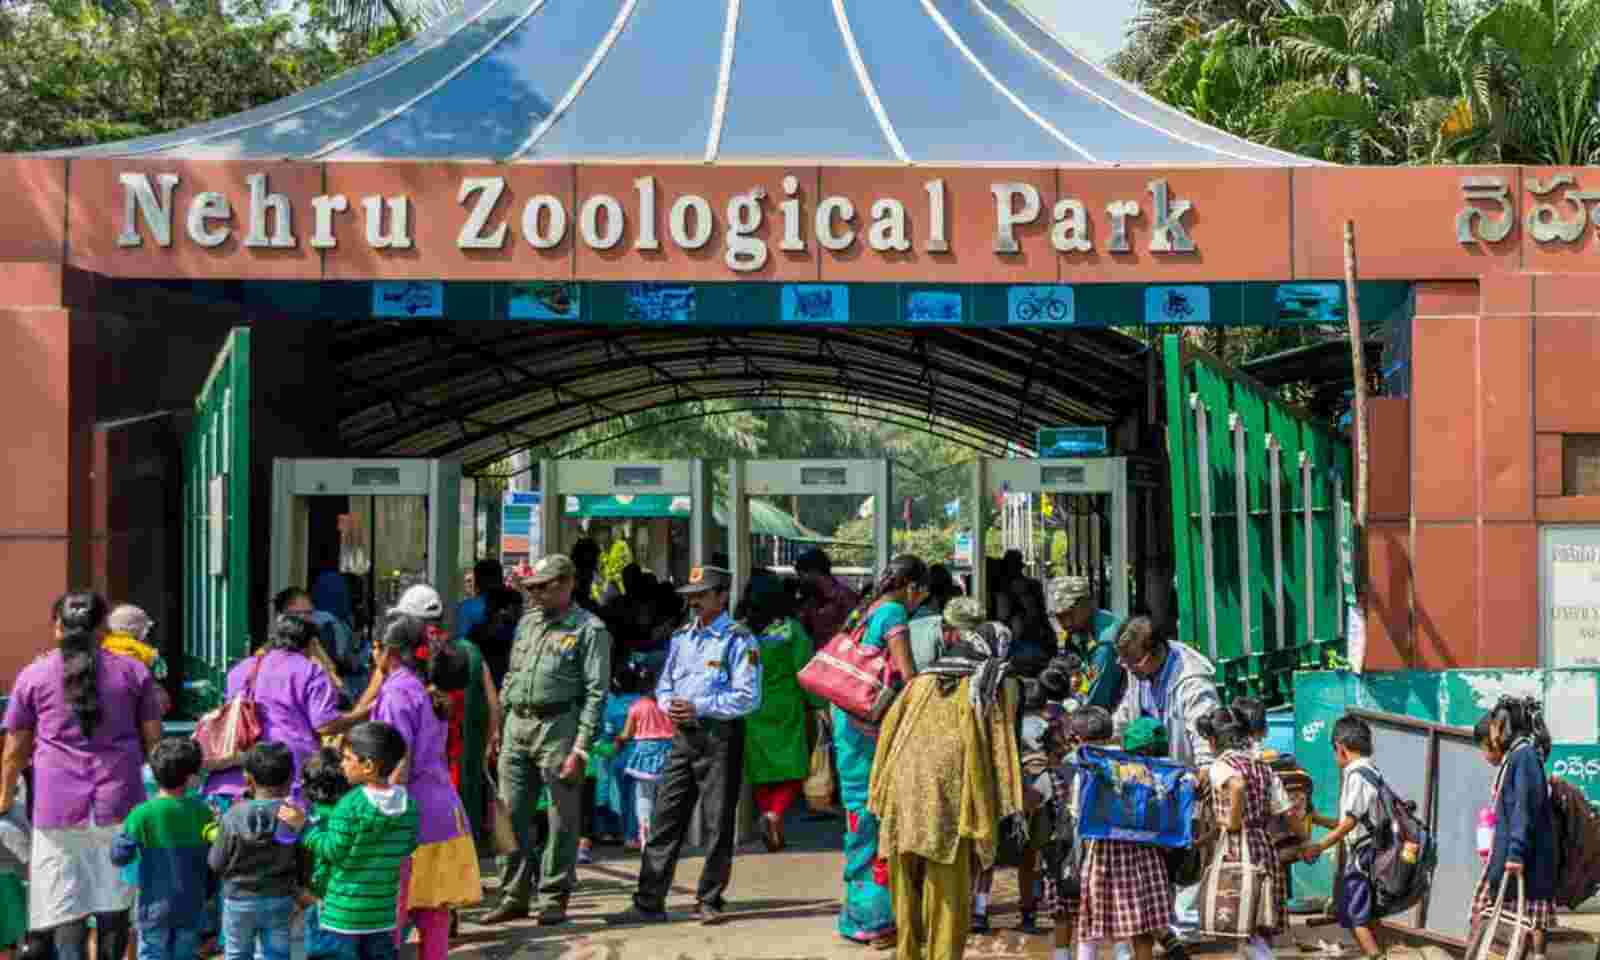 Huge crowds thrill at Nehru Zoo as summer vacation nears end